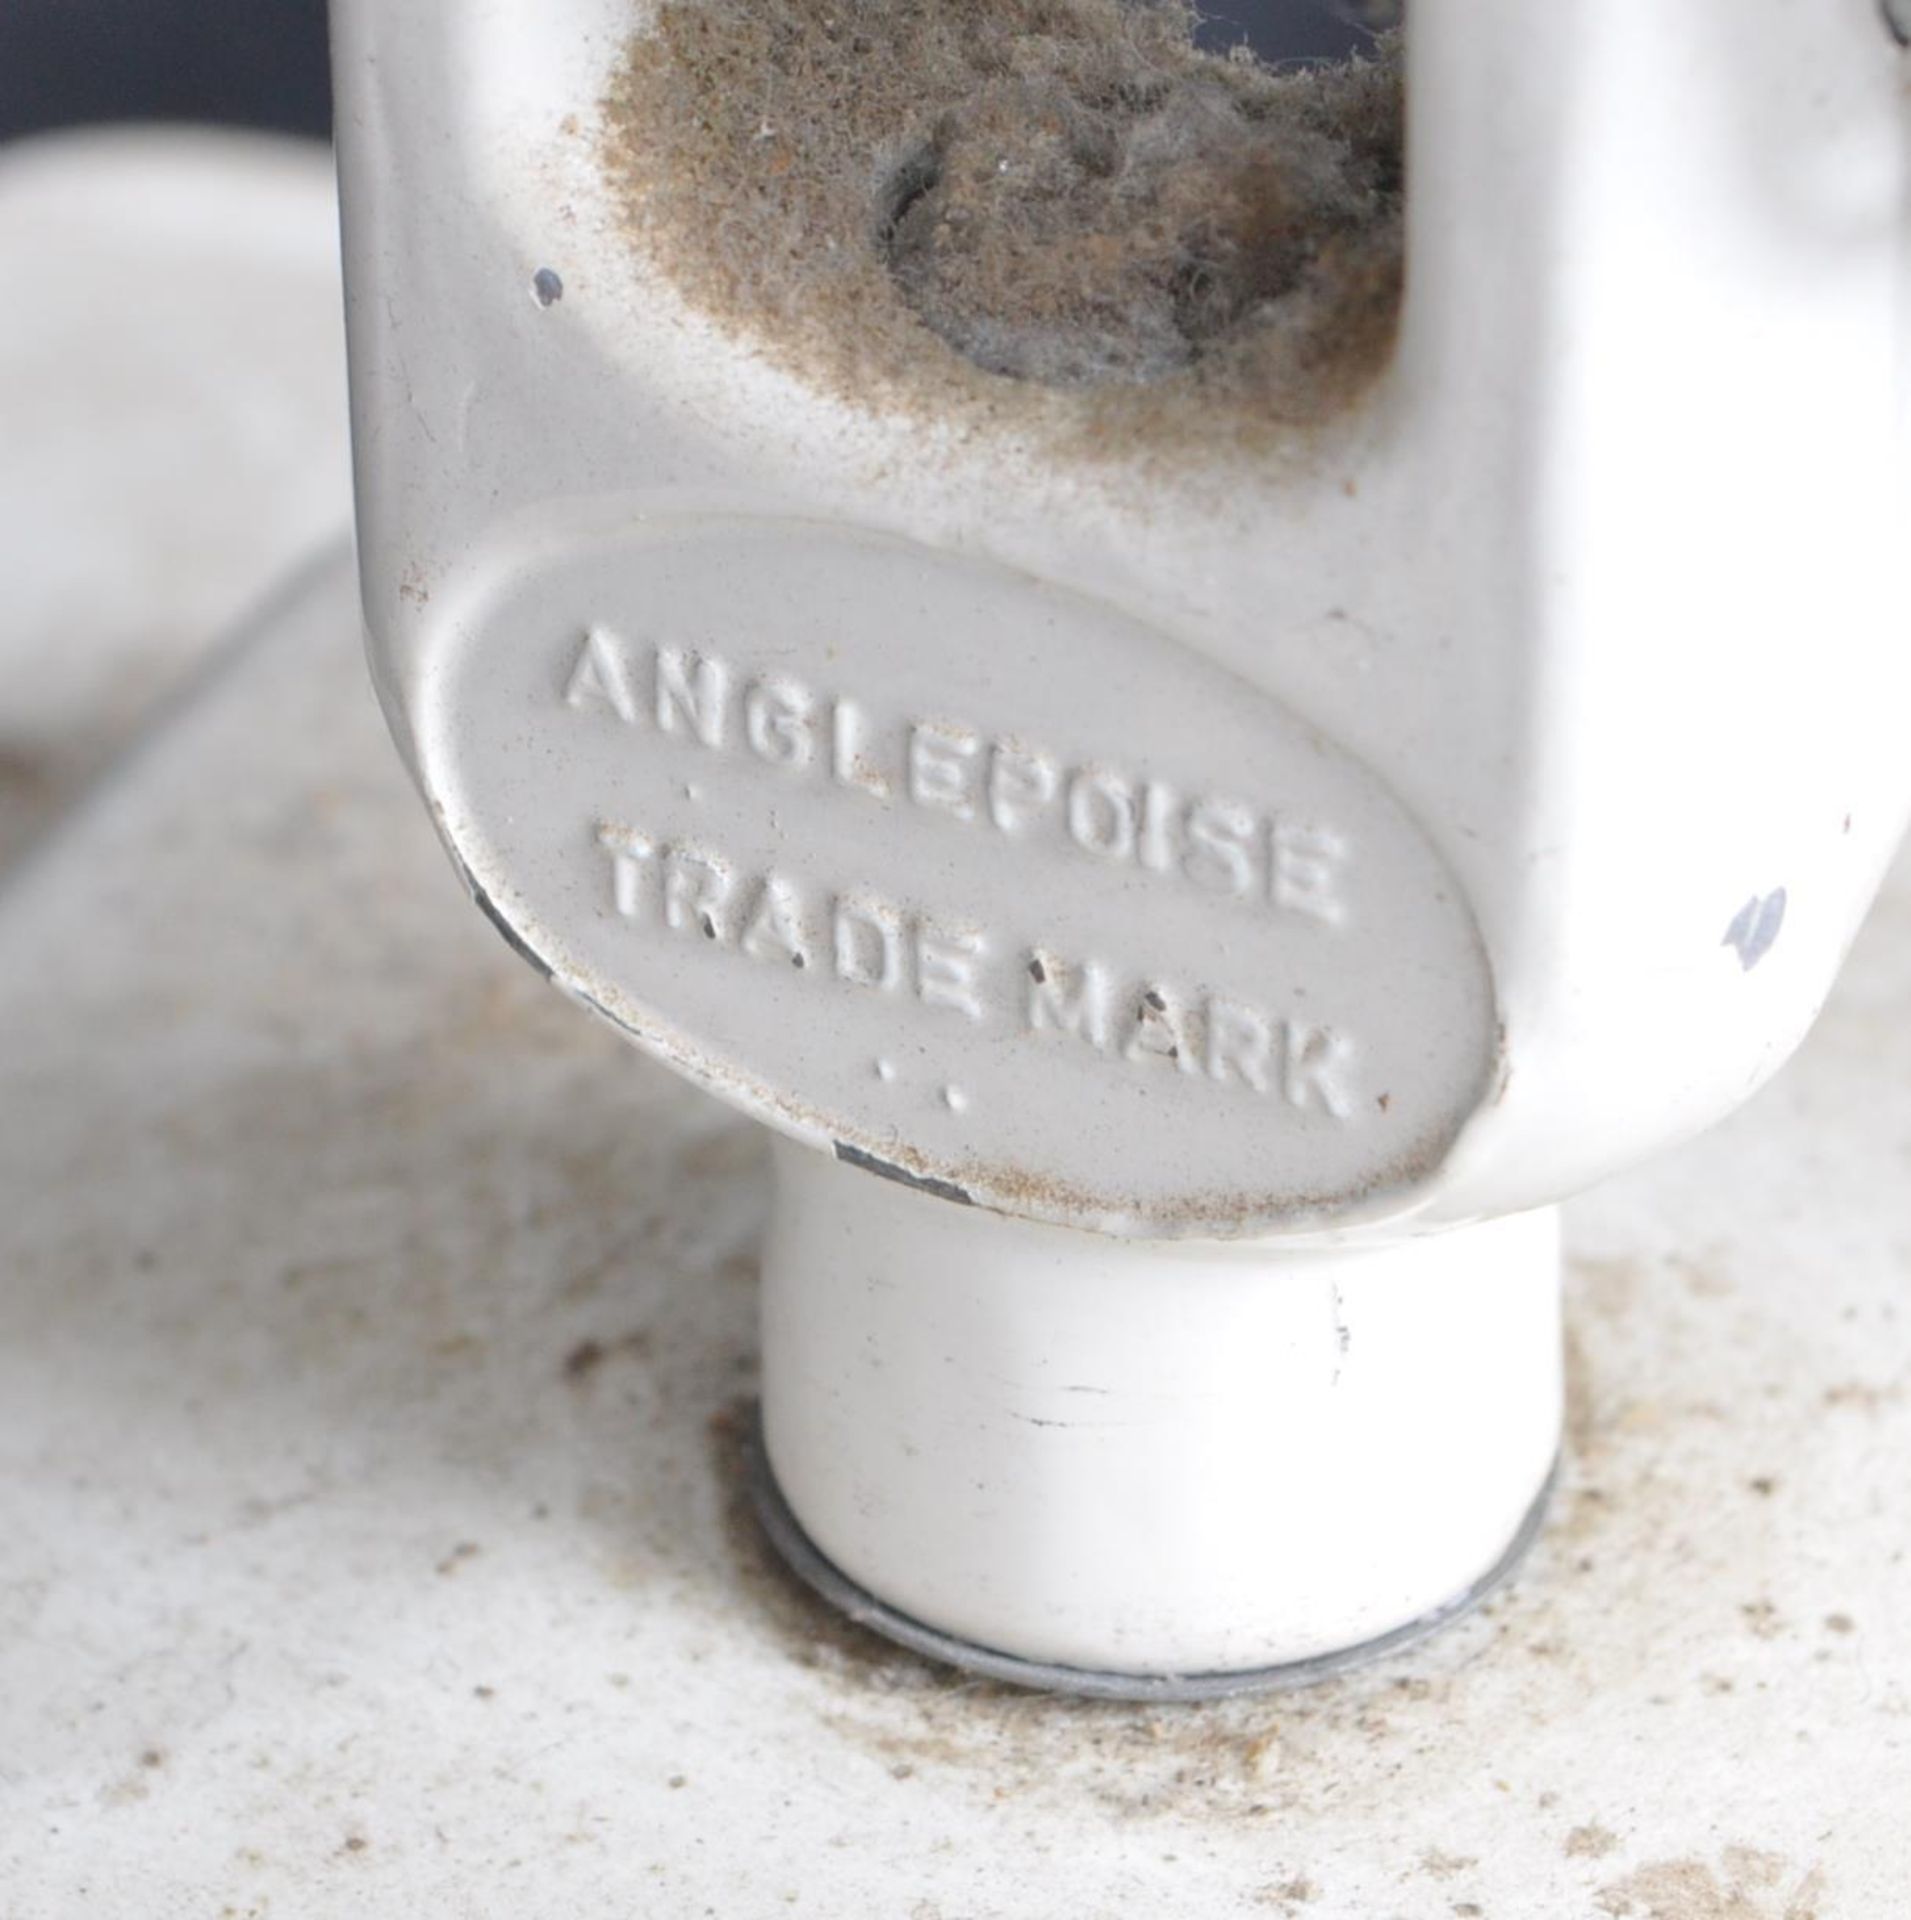 1940’S HERBERT TERRY DESK LAMP BY ANGLEPOISE - Image 3 of 8